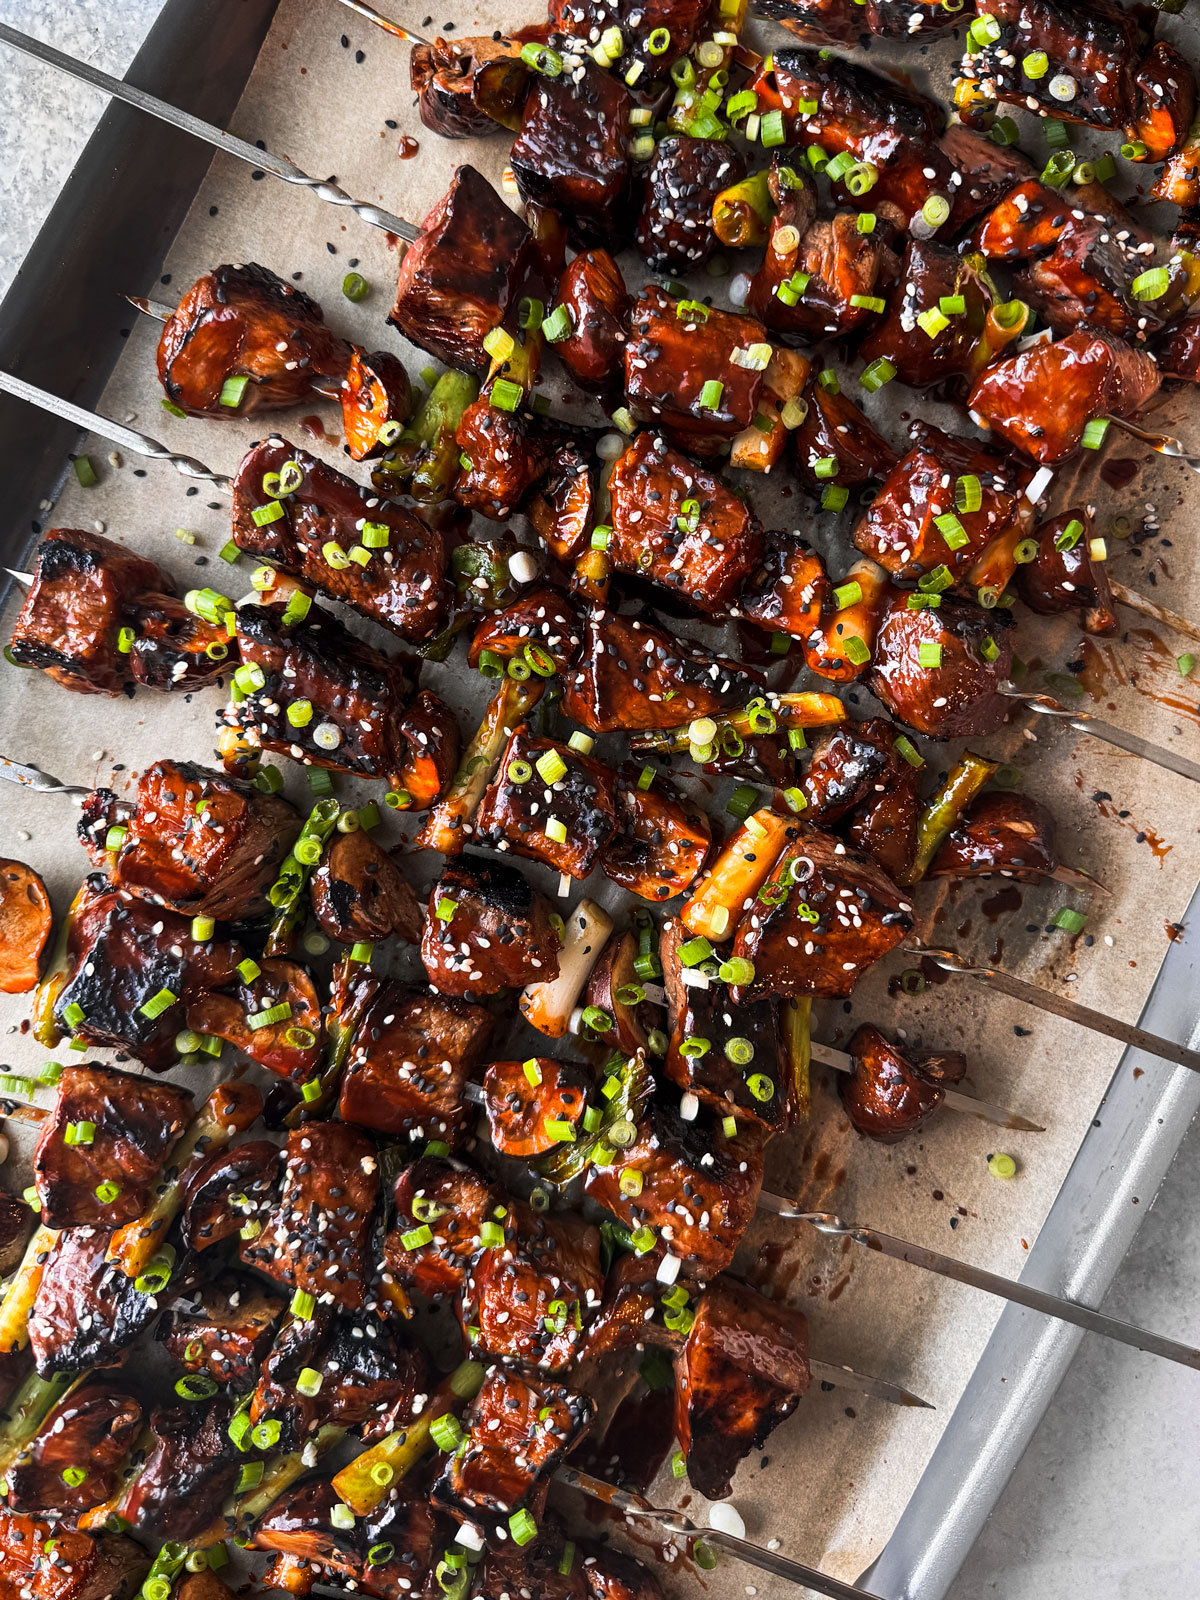 Beef skewers piled onto a baking sheet topped with chopped scallions.﻿